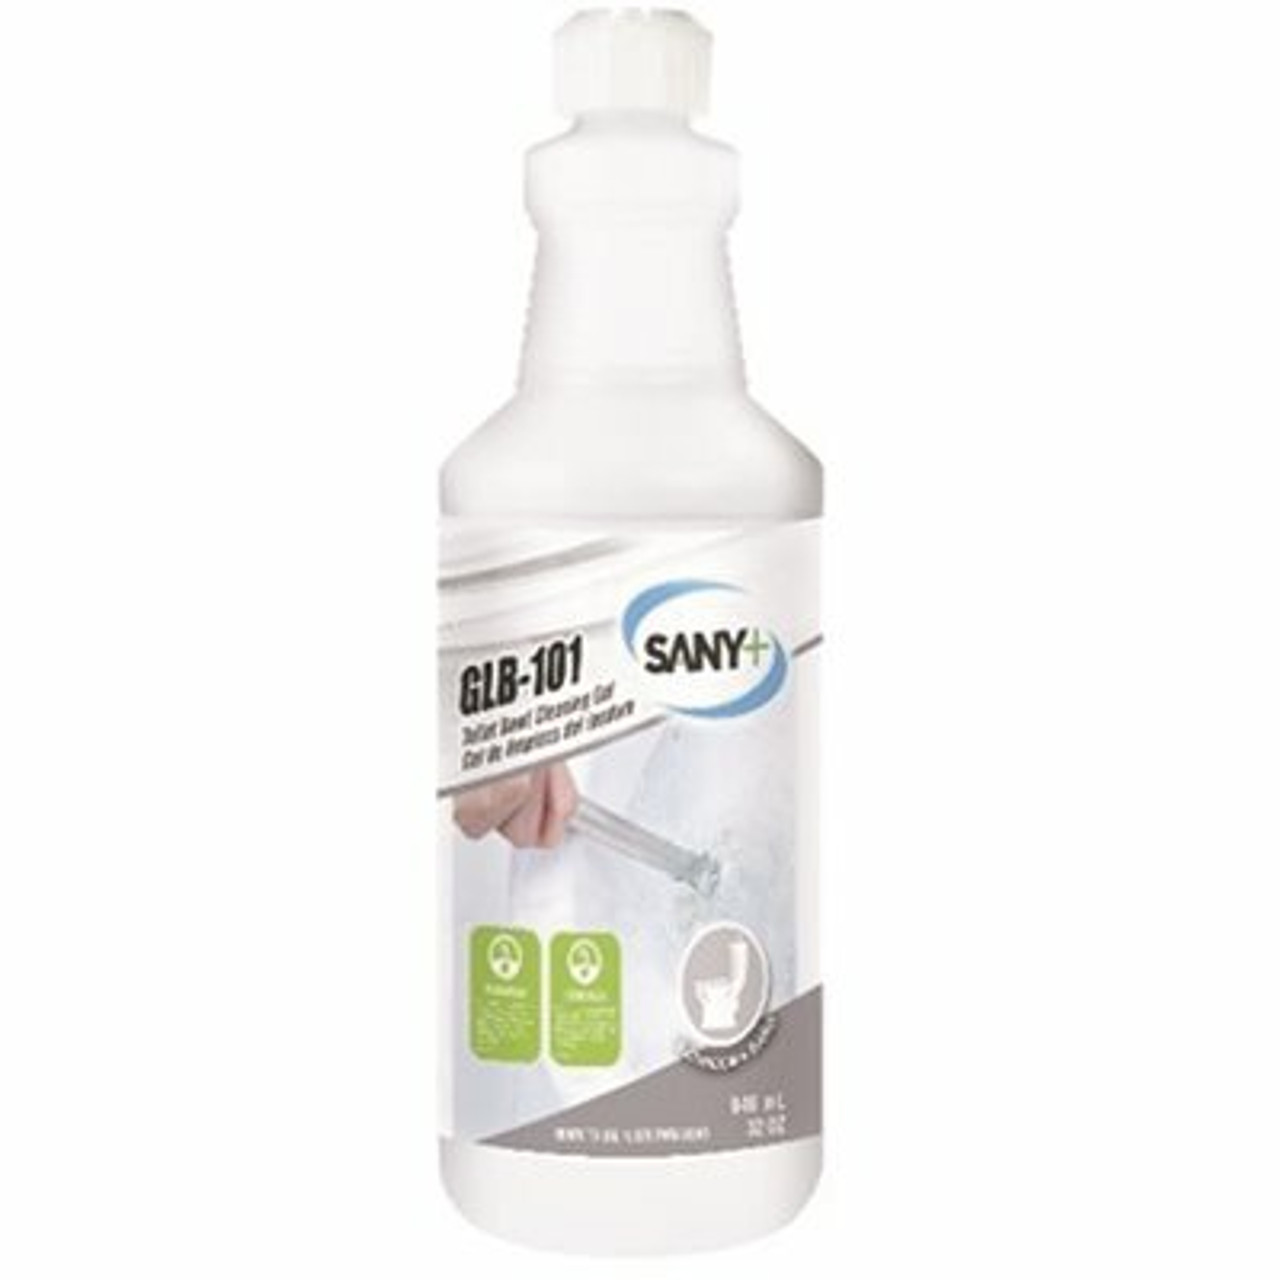 Sany+ 32 Oz. Toilet Bowl Cleaning Gel